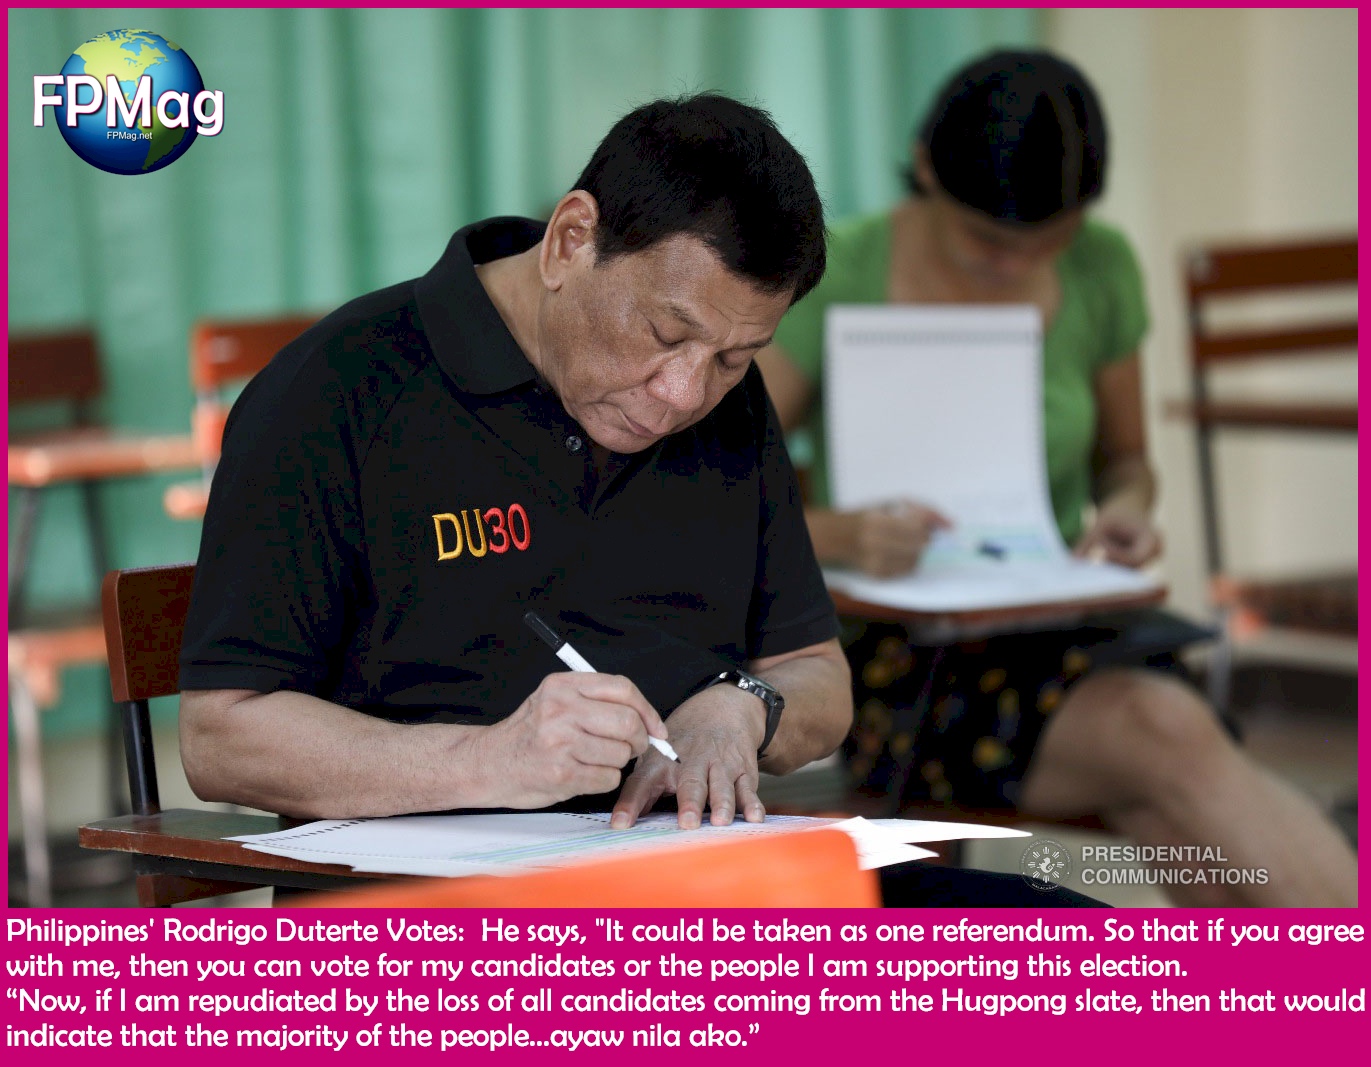 Philippines' Rodrigo Duterte Votes: He says, "It could be taken as one referendum. So that if you agree with me, then you can vote for my candidates or the people I am supporting this election. “Now, if I am repudiated by the loss of all candidates coming from the Hugpong slate, then that would indicate that the majority of the people…ayaw nila ako.”